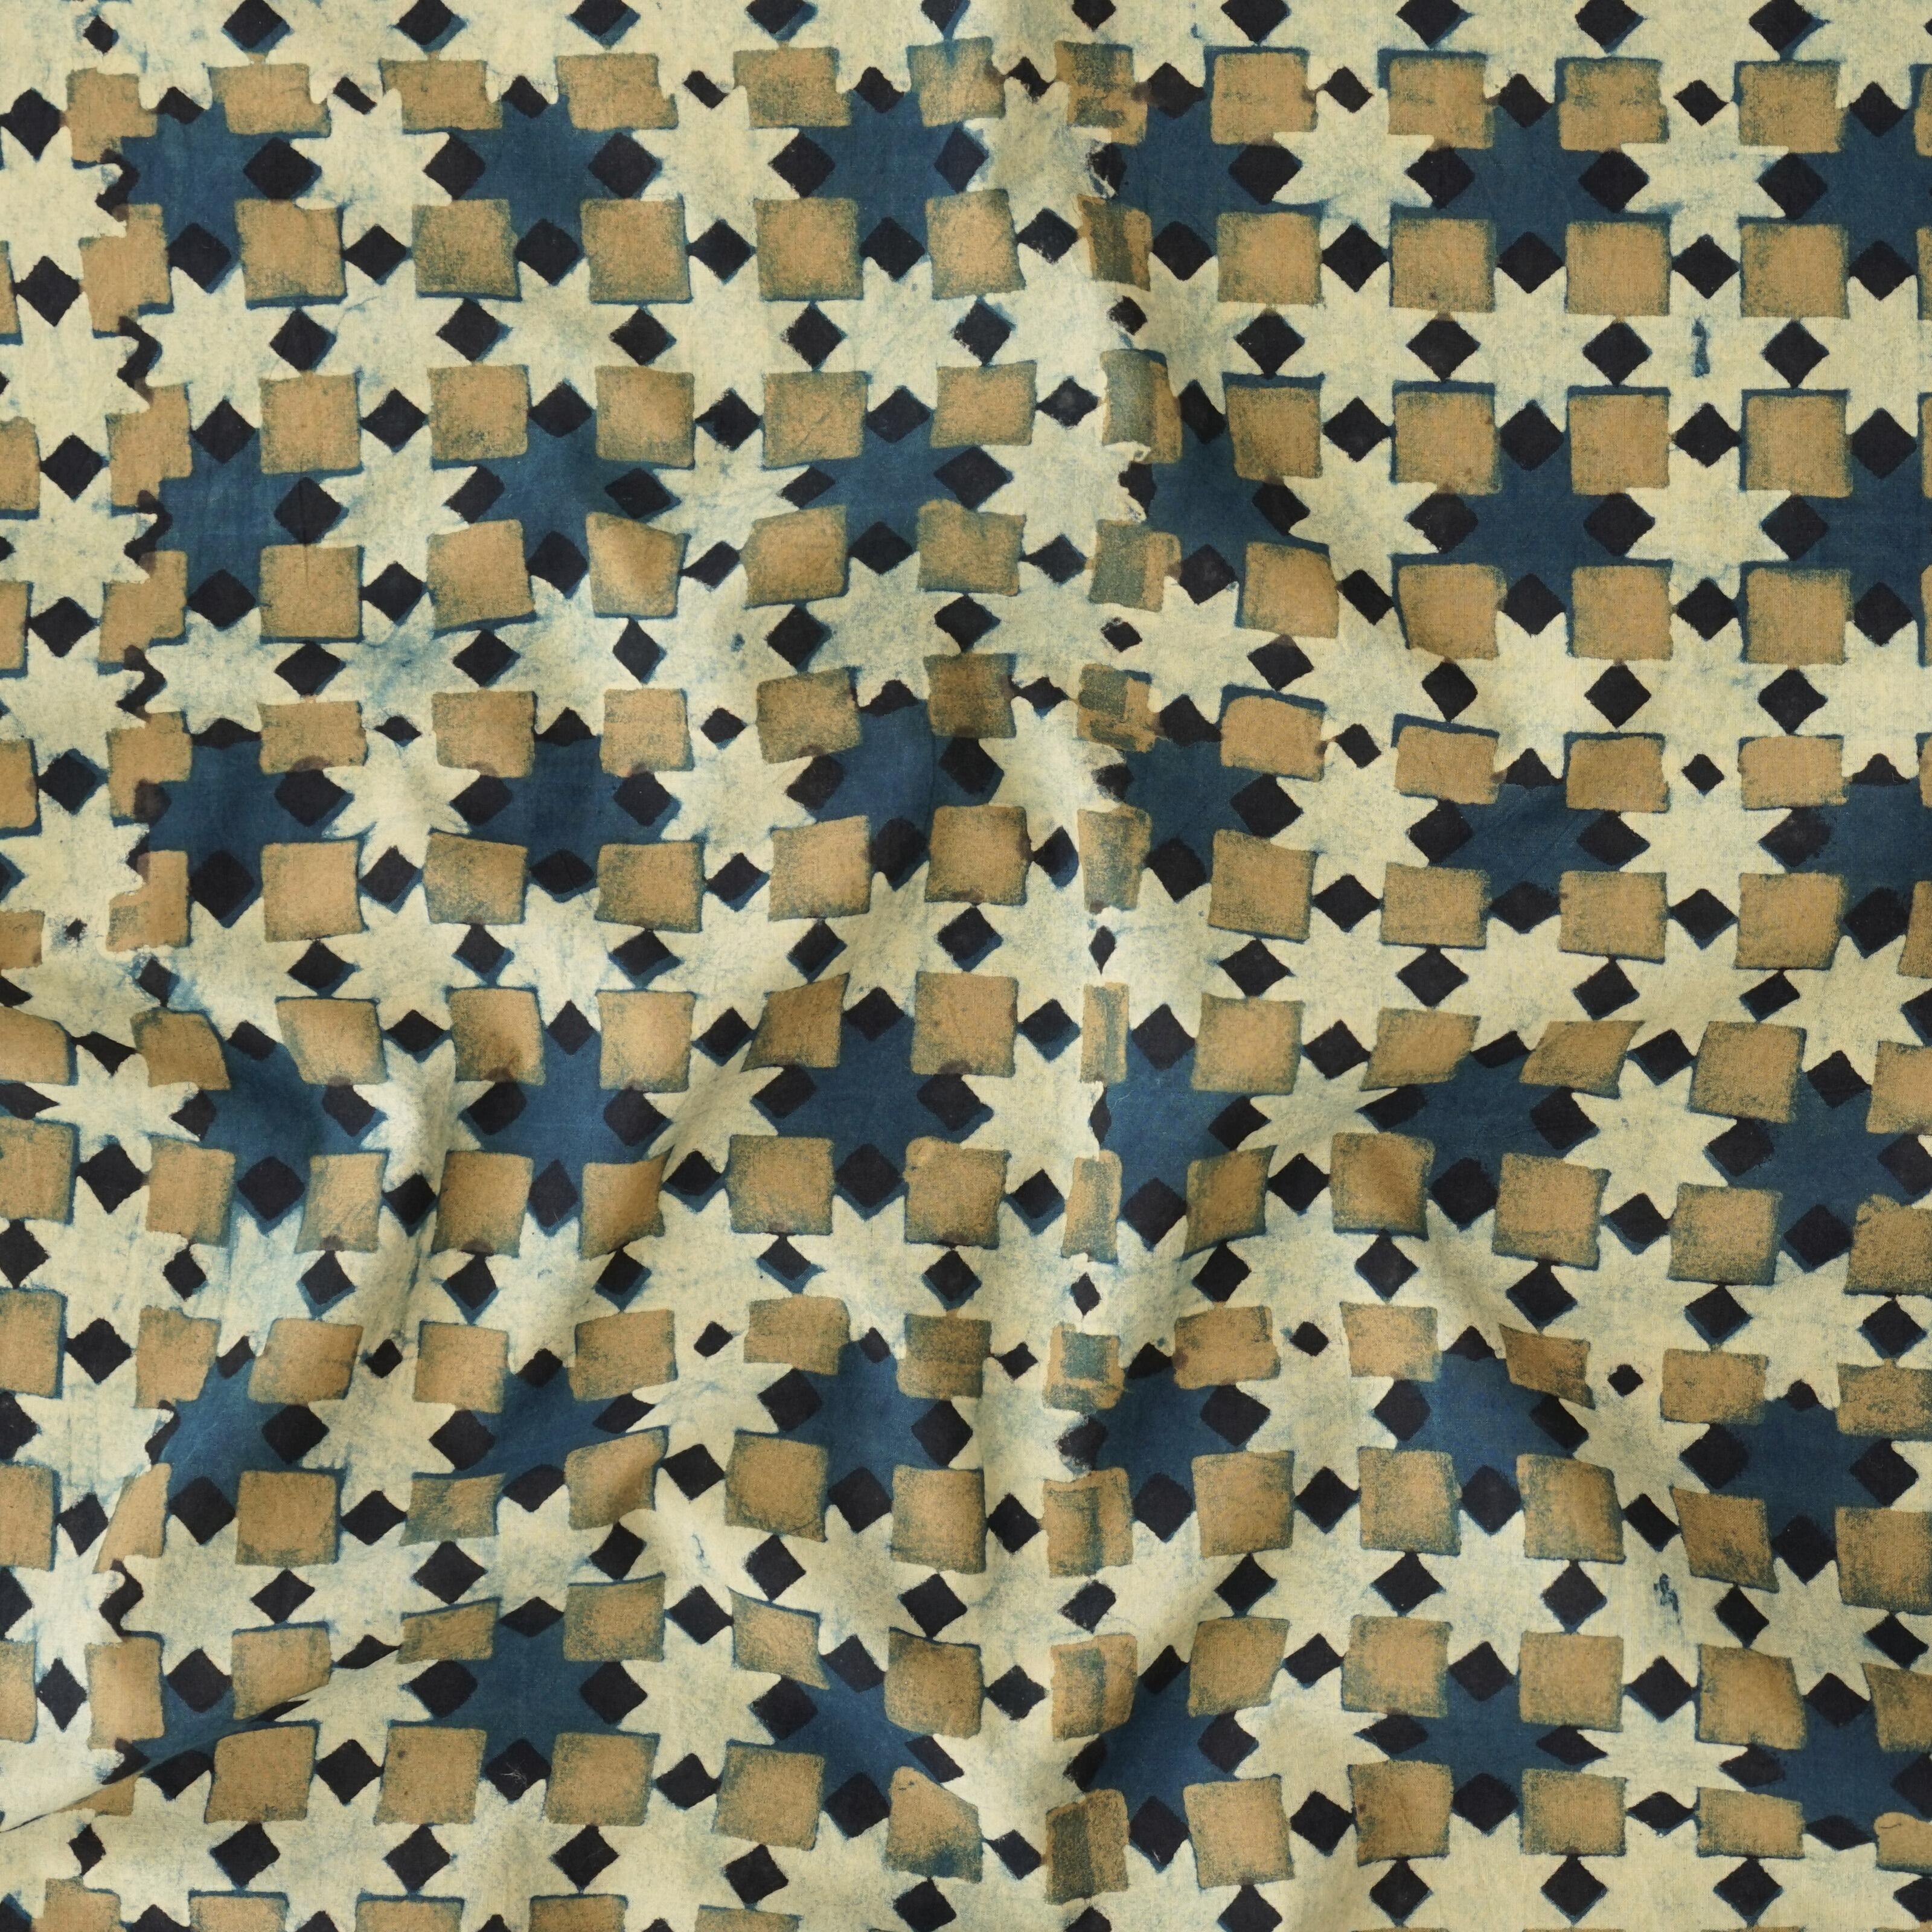 SIK63 - Block-Printed Fabric - 100% Cotton Cloth - Indigo & Yellow Dyes - Blueberry Trifle - Contrast